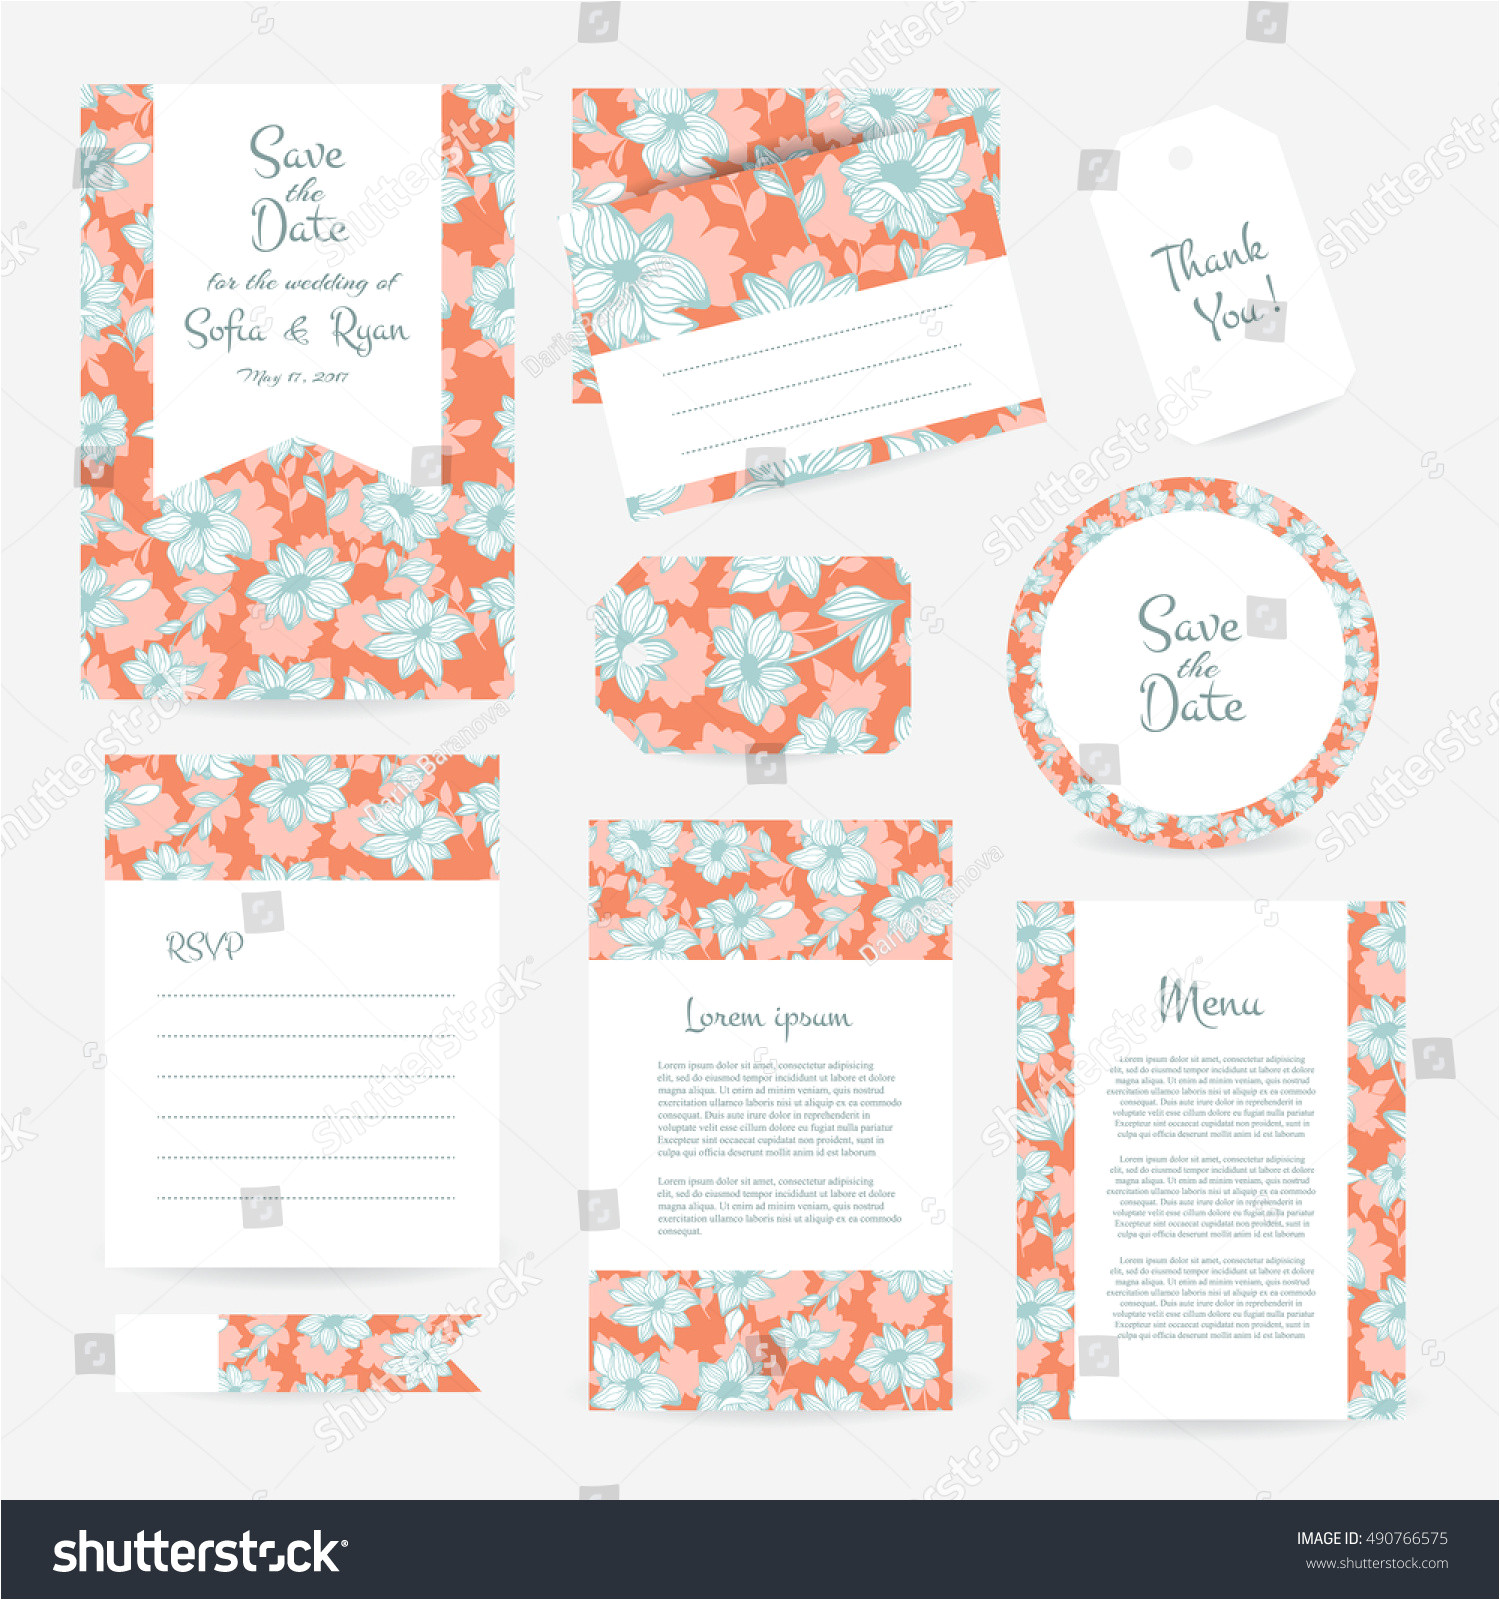 stock vector vector gentle wedding cards template with flower design wedding invitation or save the date rsvp 490766575 jpg